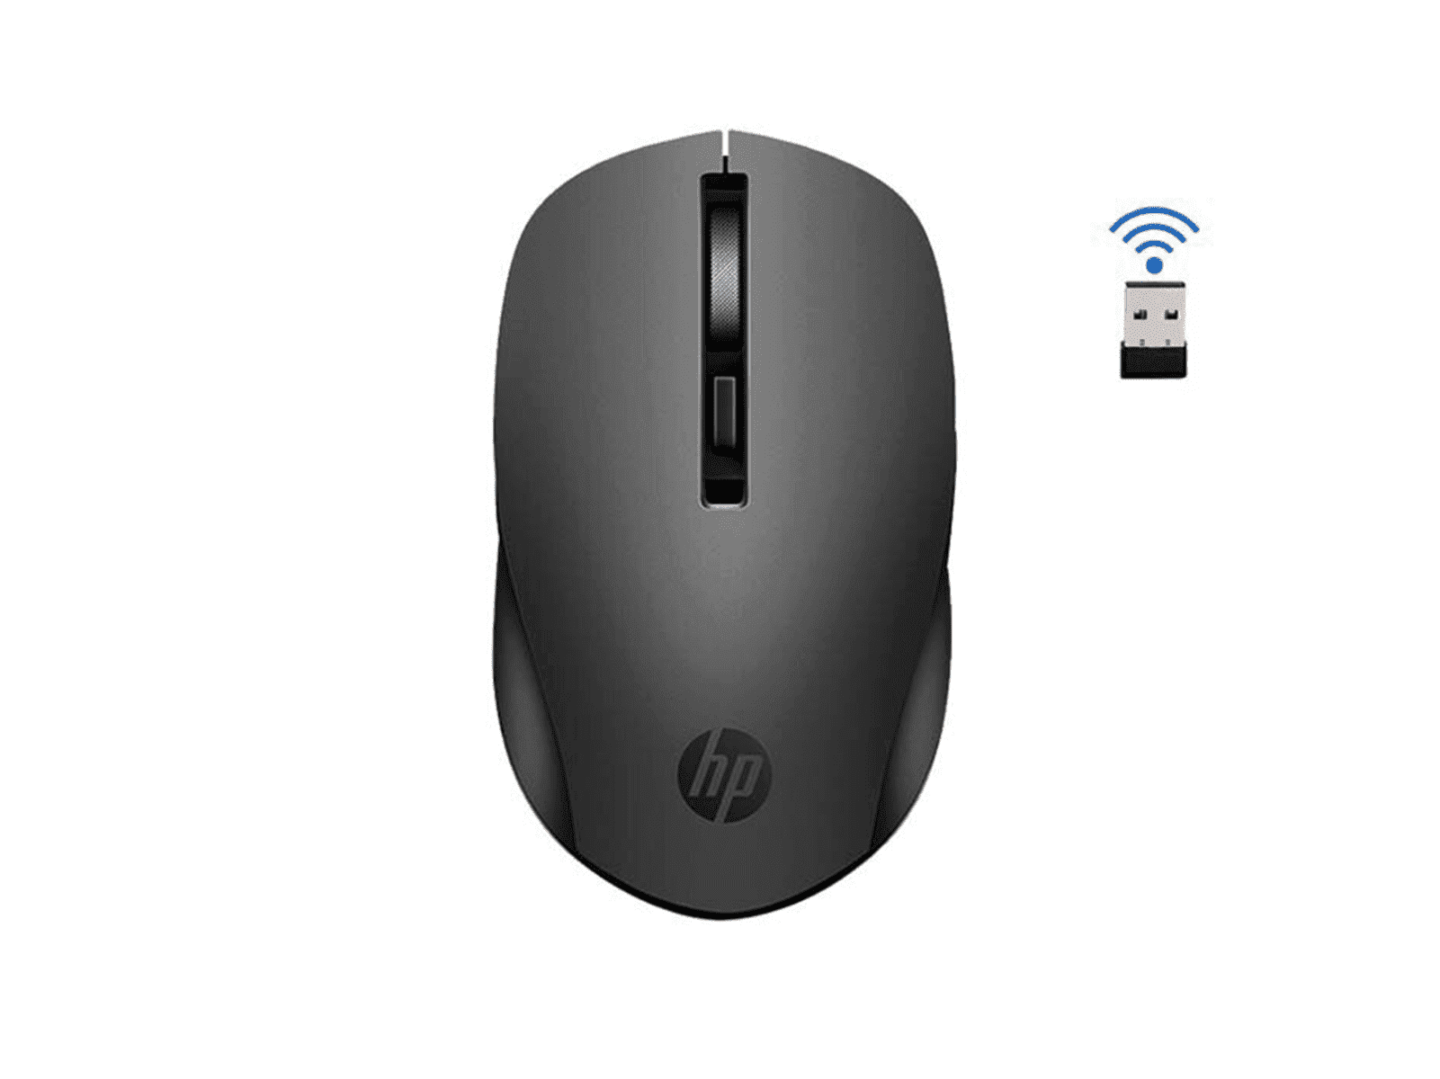 HP Silent Wireless Mouse S1000 Plus: Buy HP Silent Wireless Mouse S1000 Plus in Sri Lanka | ido.lk